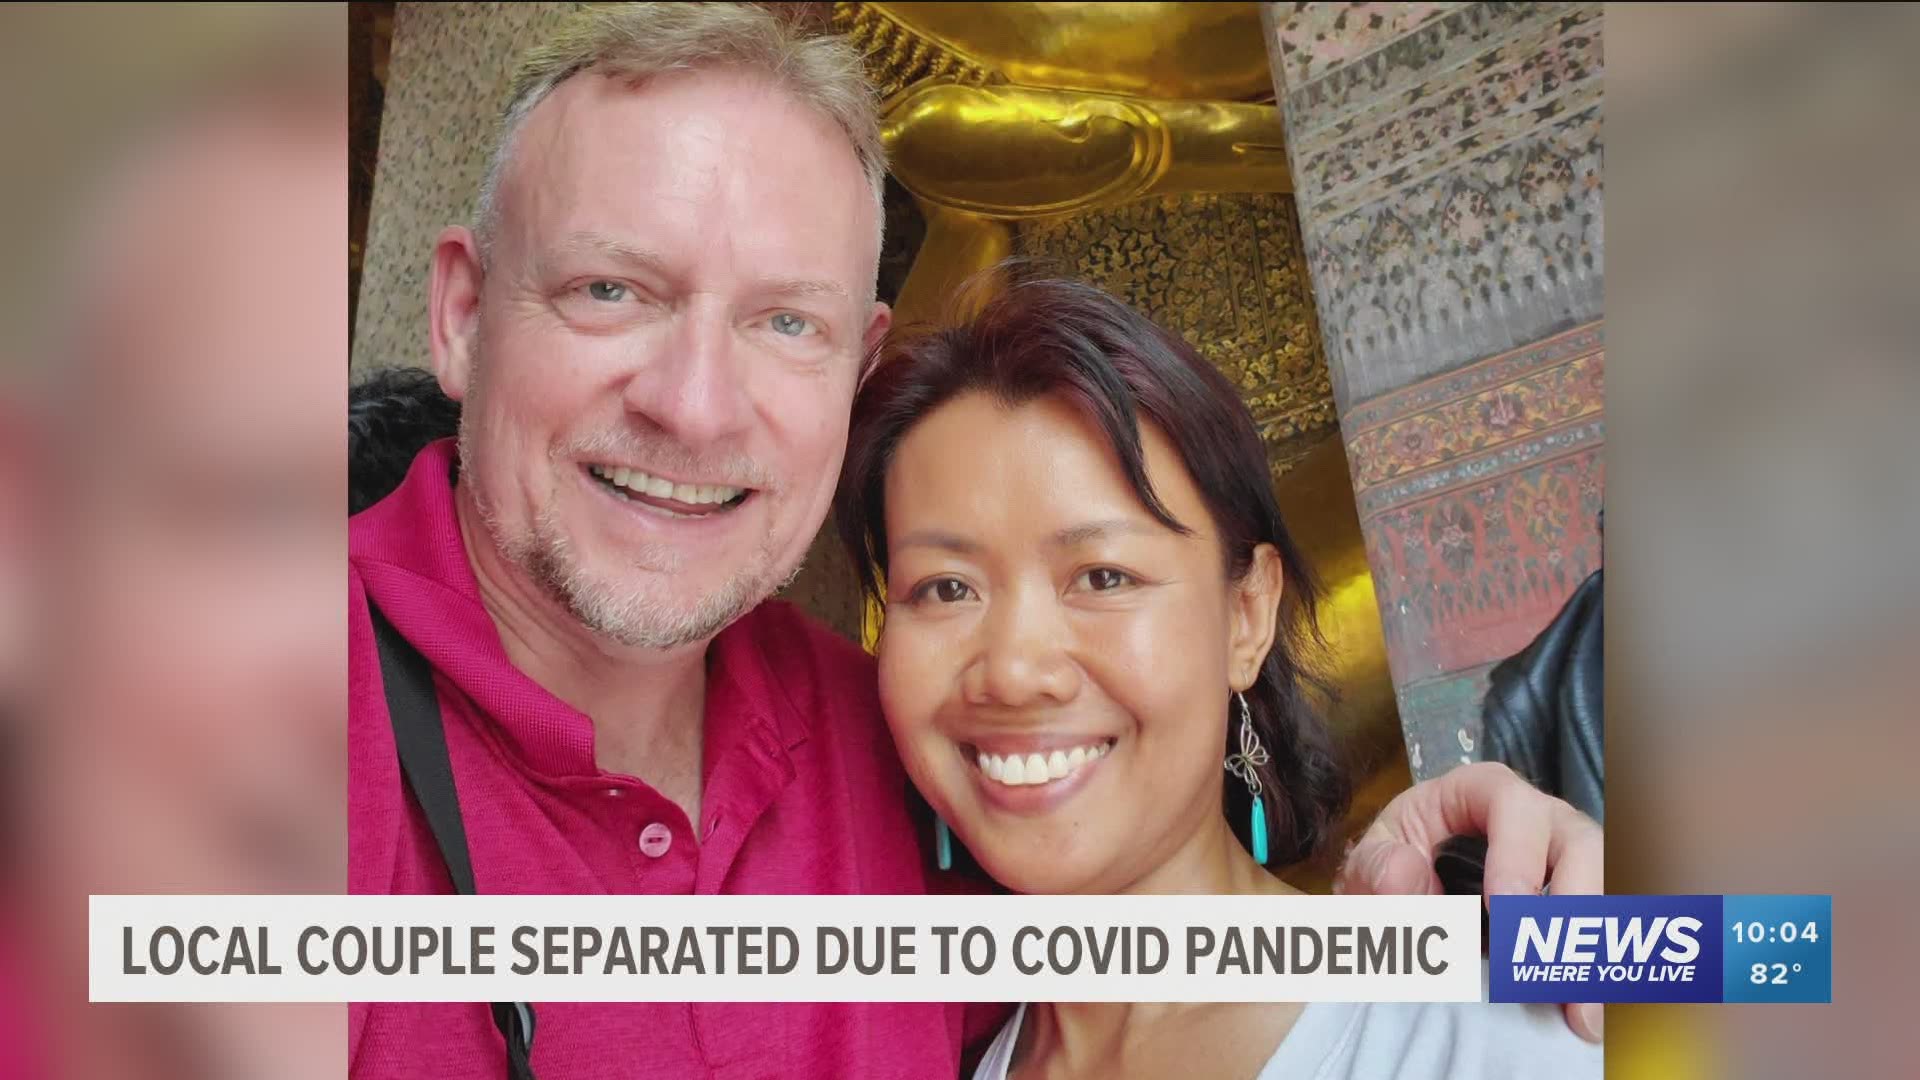 Local couple separated due to COVID pandemic.